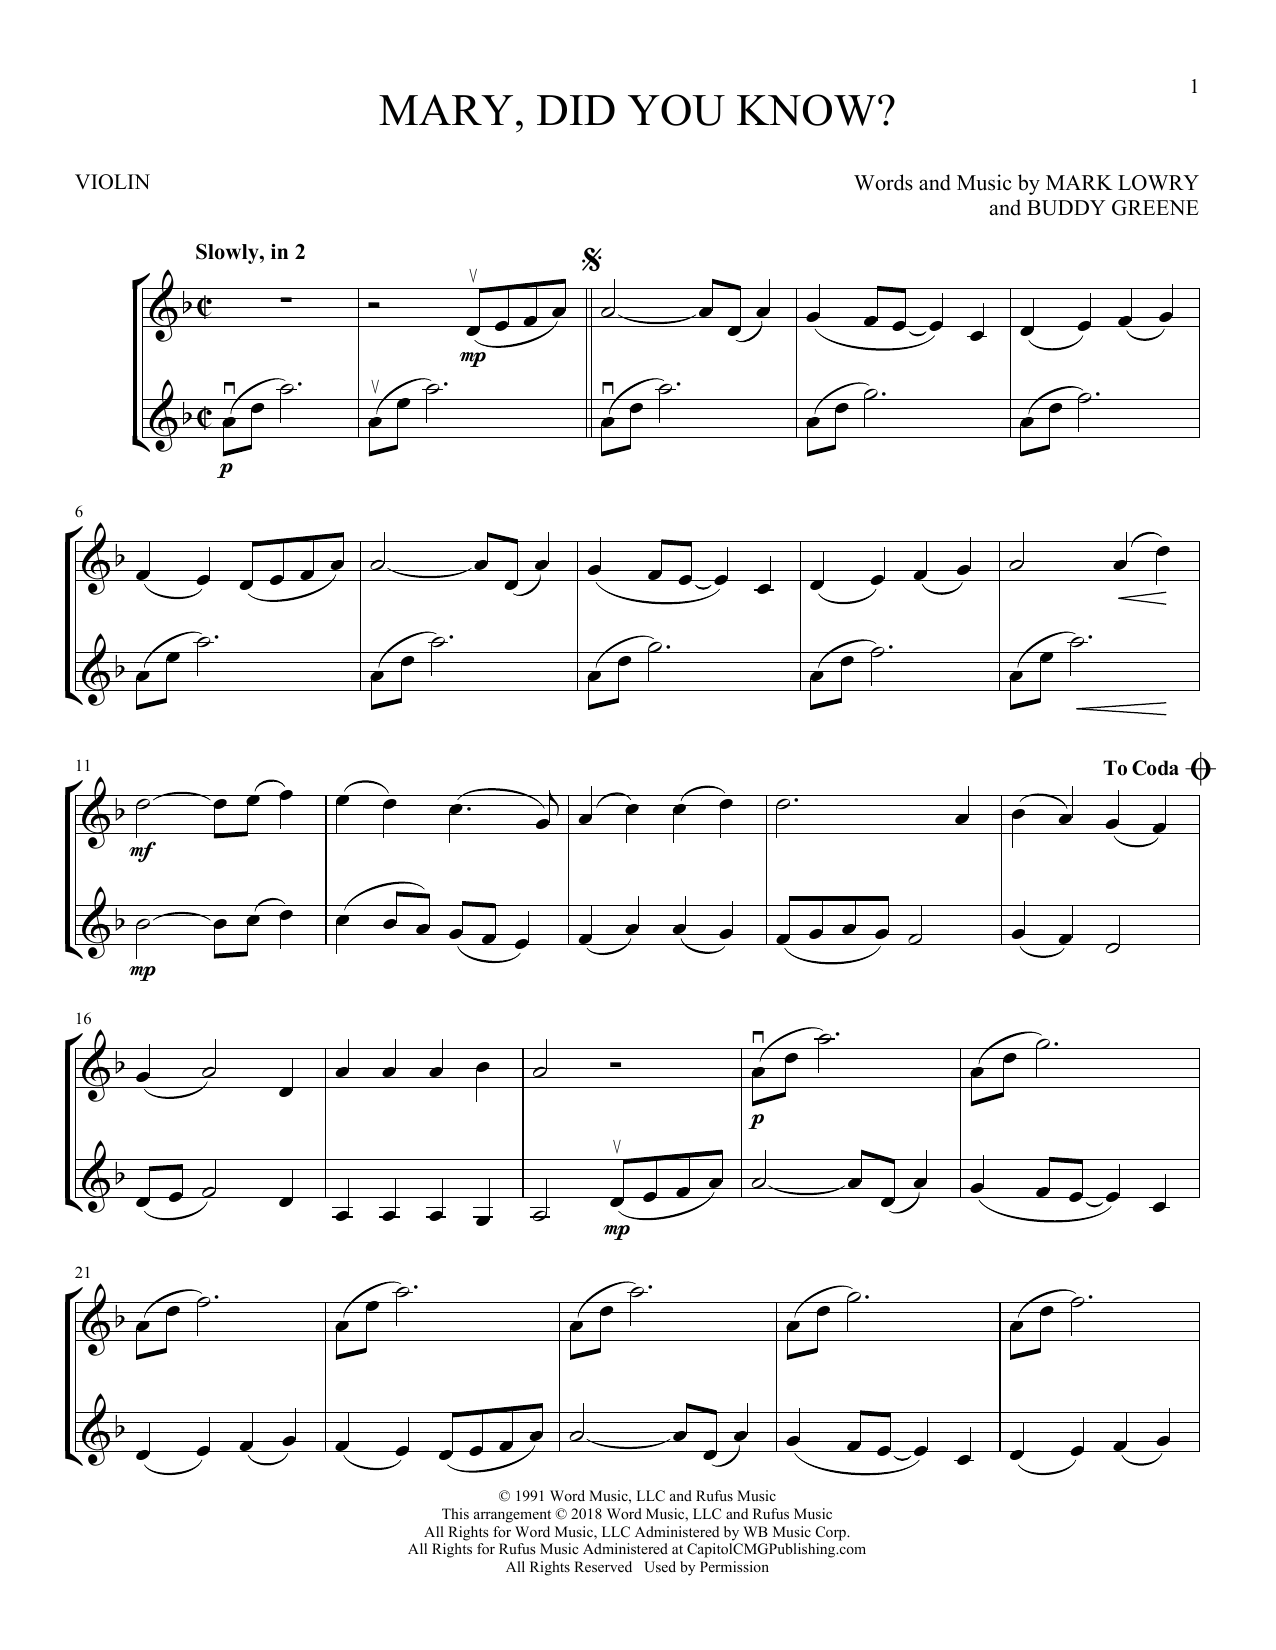 Download Mark Lowry Mary, Did You Know? Sheet Music